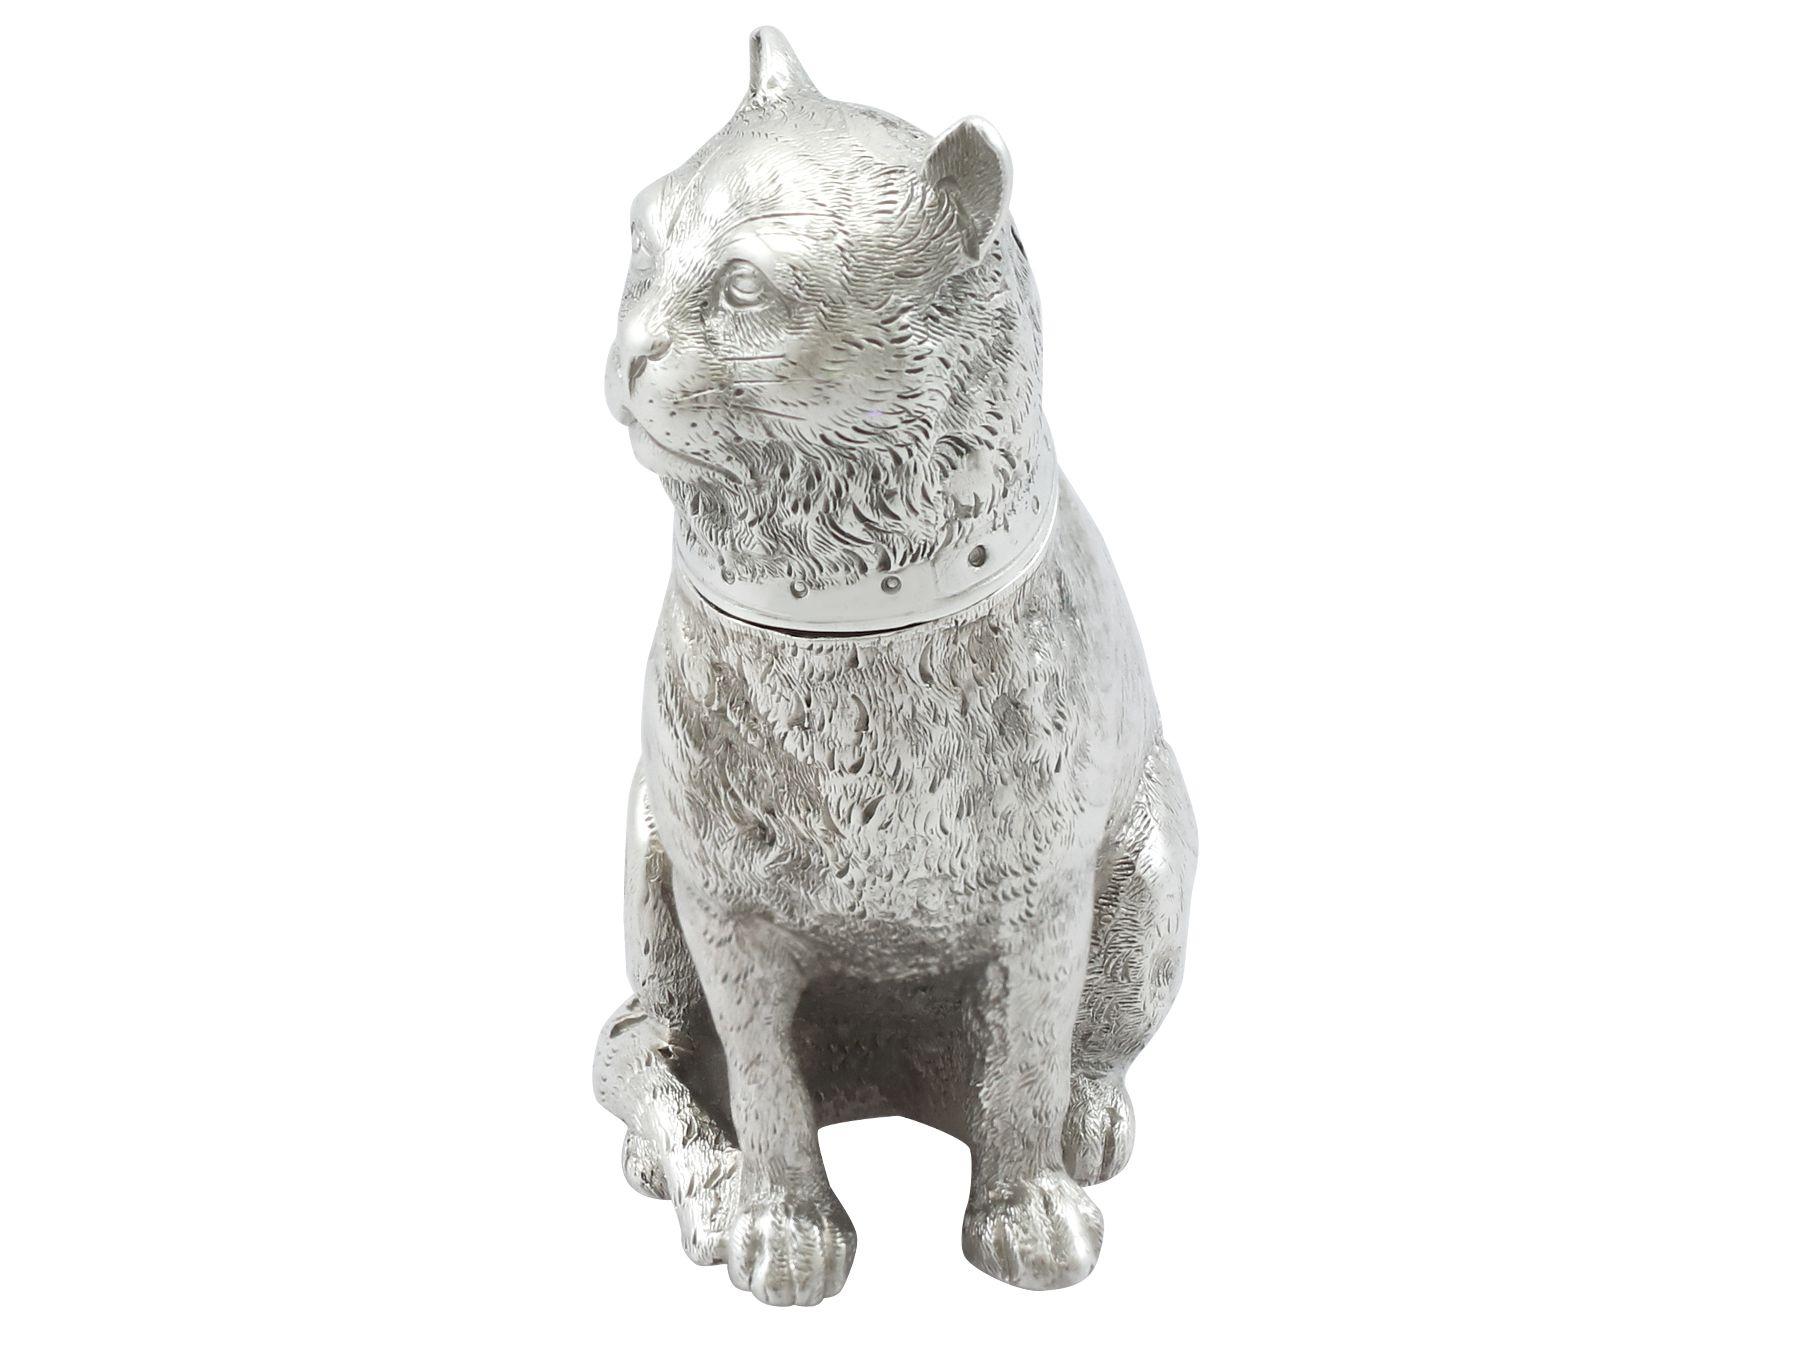 An exceptional, fine and impressive antique Victorian English sterling silver pepper shaker modelled in the form of a cat; an addition to our animal related silverware collection.

This exceptional, fine and impressive antique Victorian cast